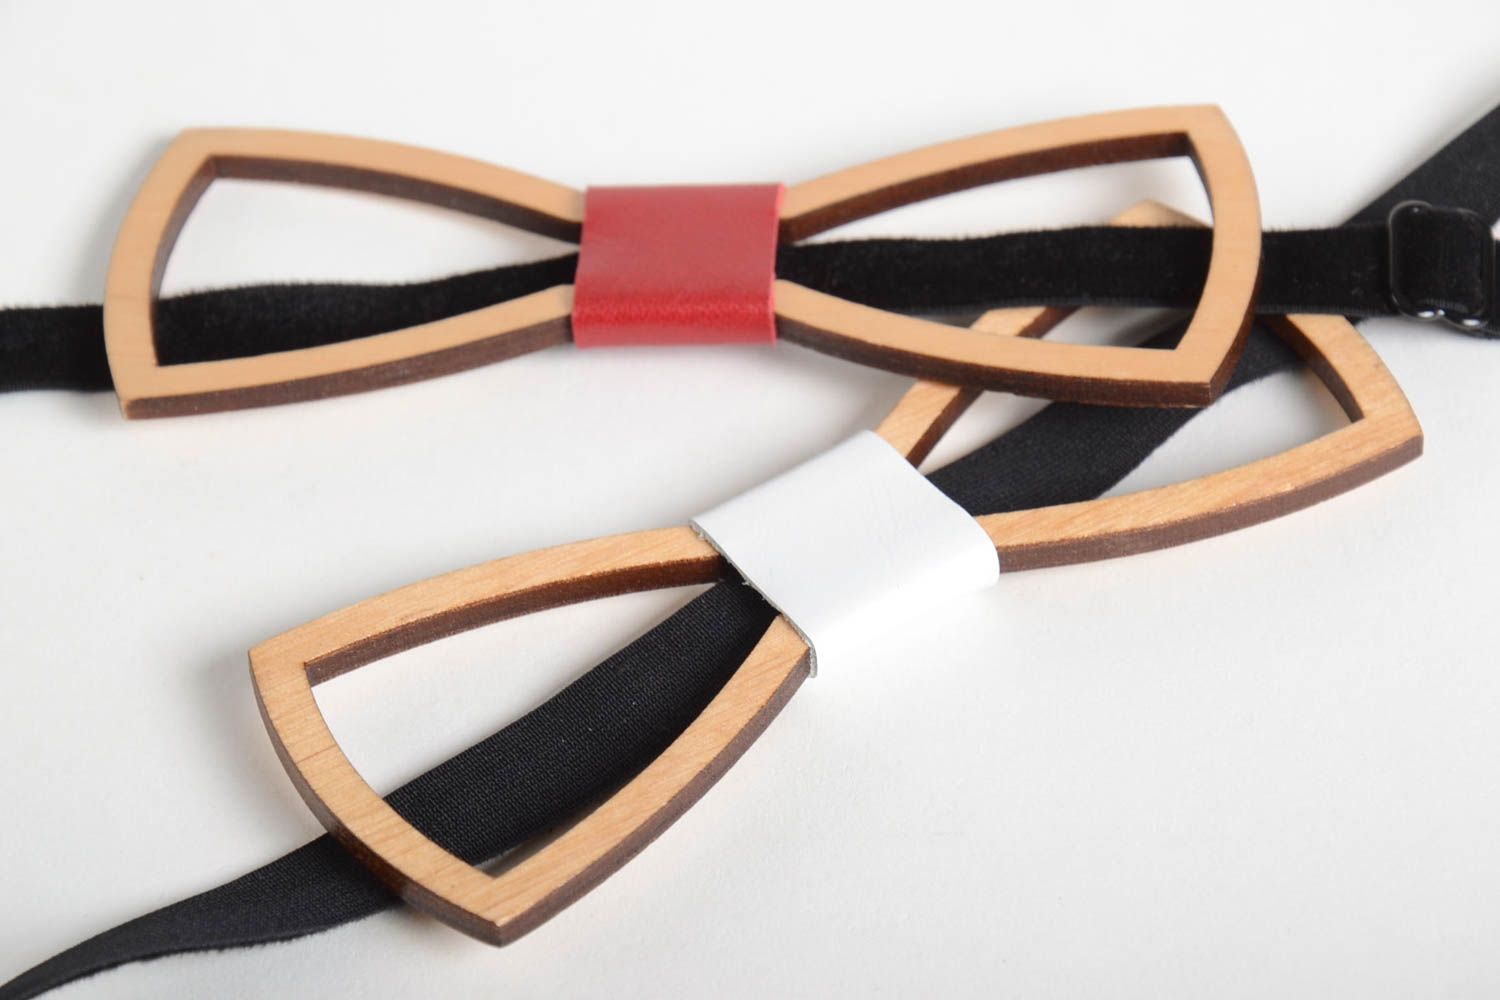 Handcrafted bow ties wooden bow ties accessories for men gifts for boyfriend photo 5